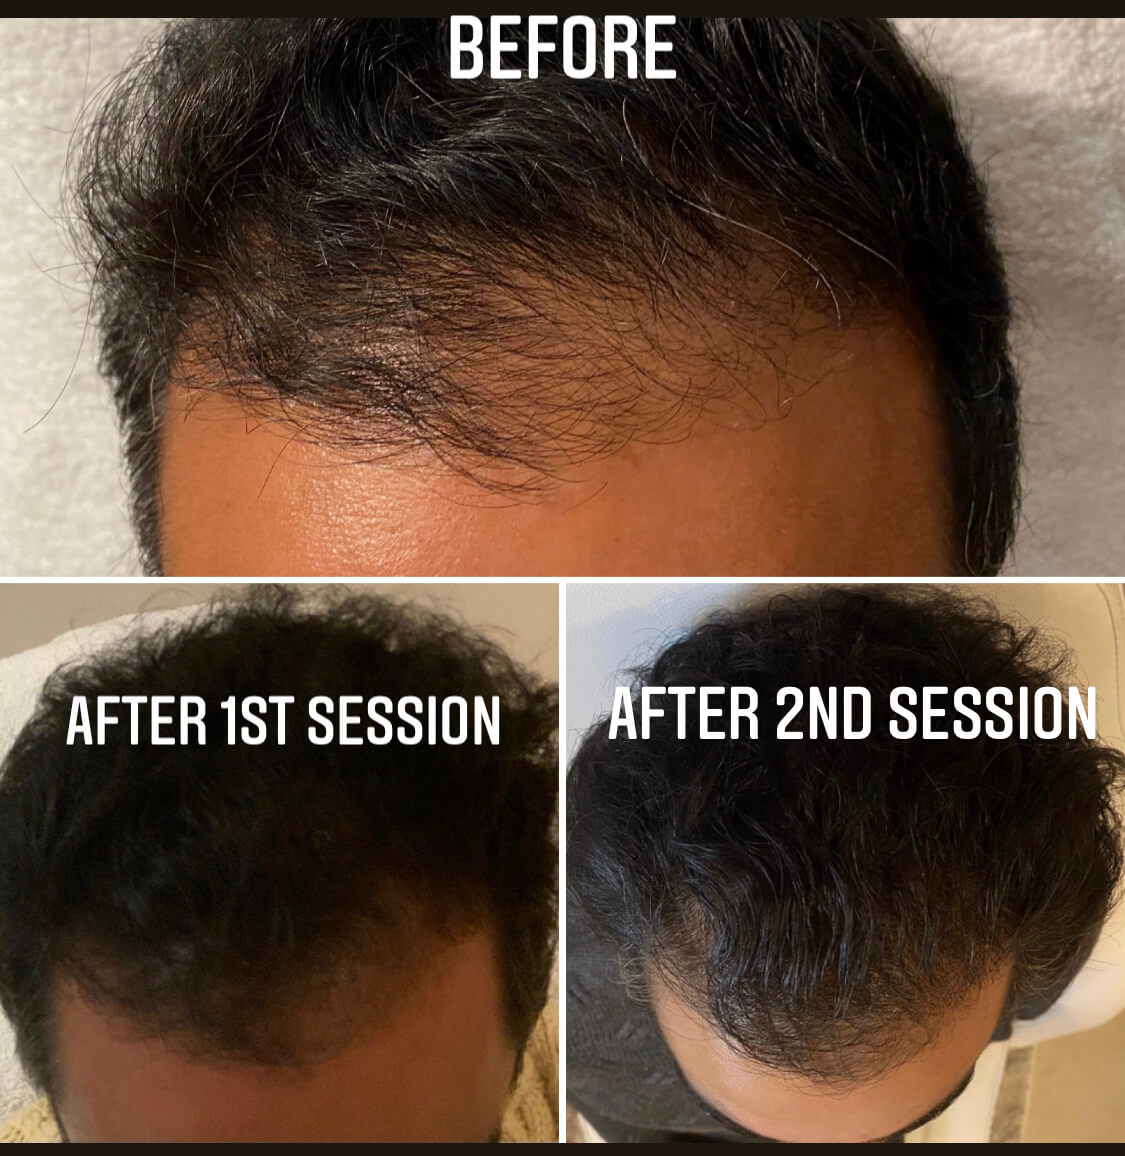 What Is Platelet-Rich Plasma Therapy (PRP) for Hair Loss?